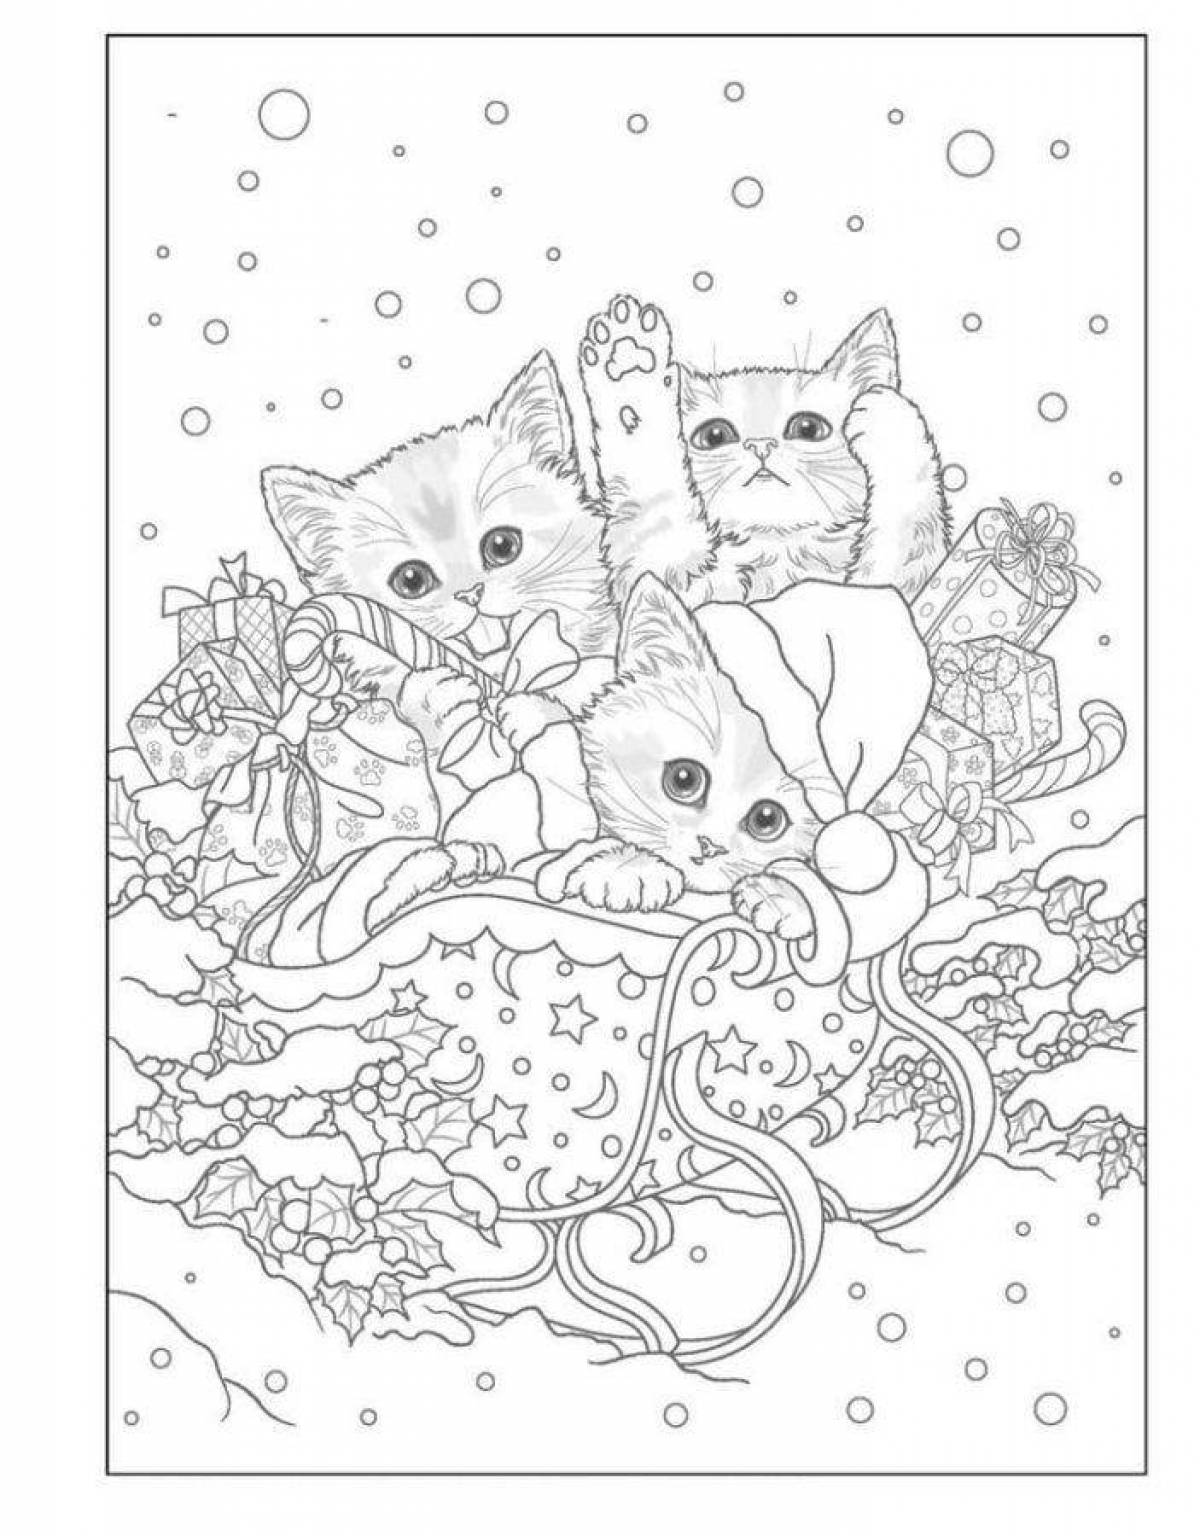 Playful coloring complex cats